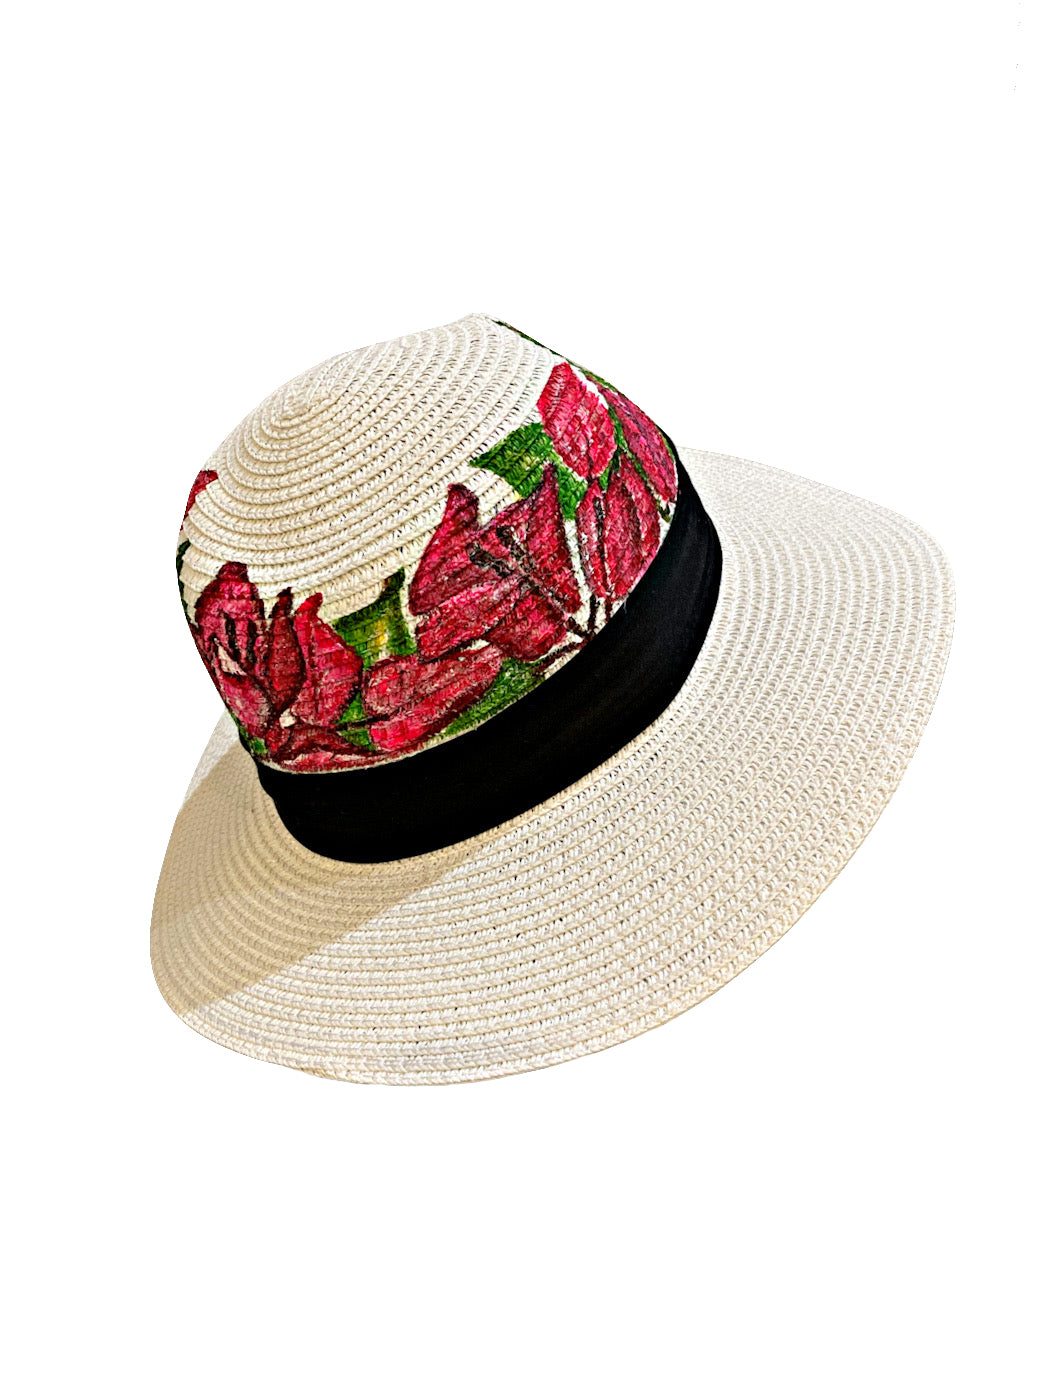 Bougainvillea Hand Painted Hat